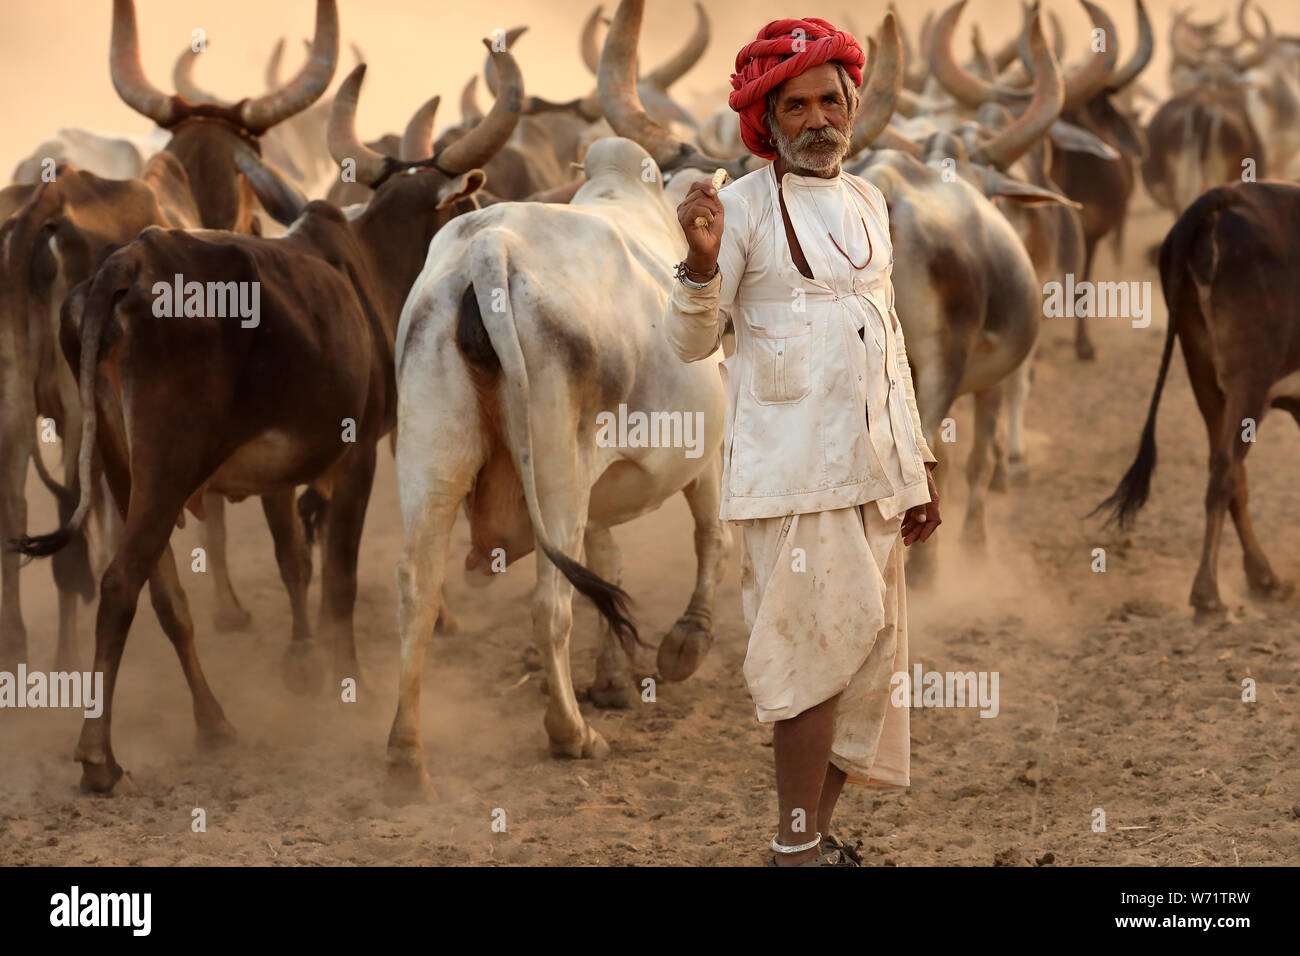 Rabari herder in a rural village in the district of Kutch, Gujarat. The Kutch region is well known for its tribal life and traditional culture. Stock Photo